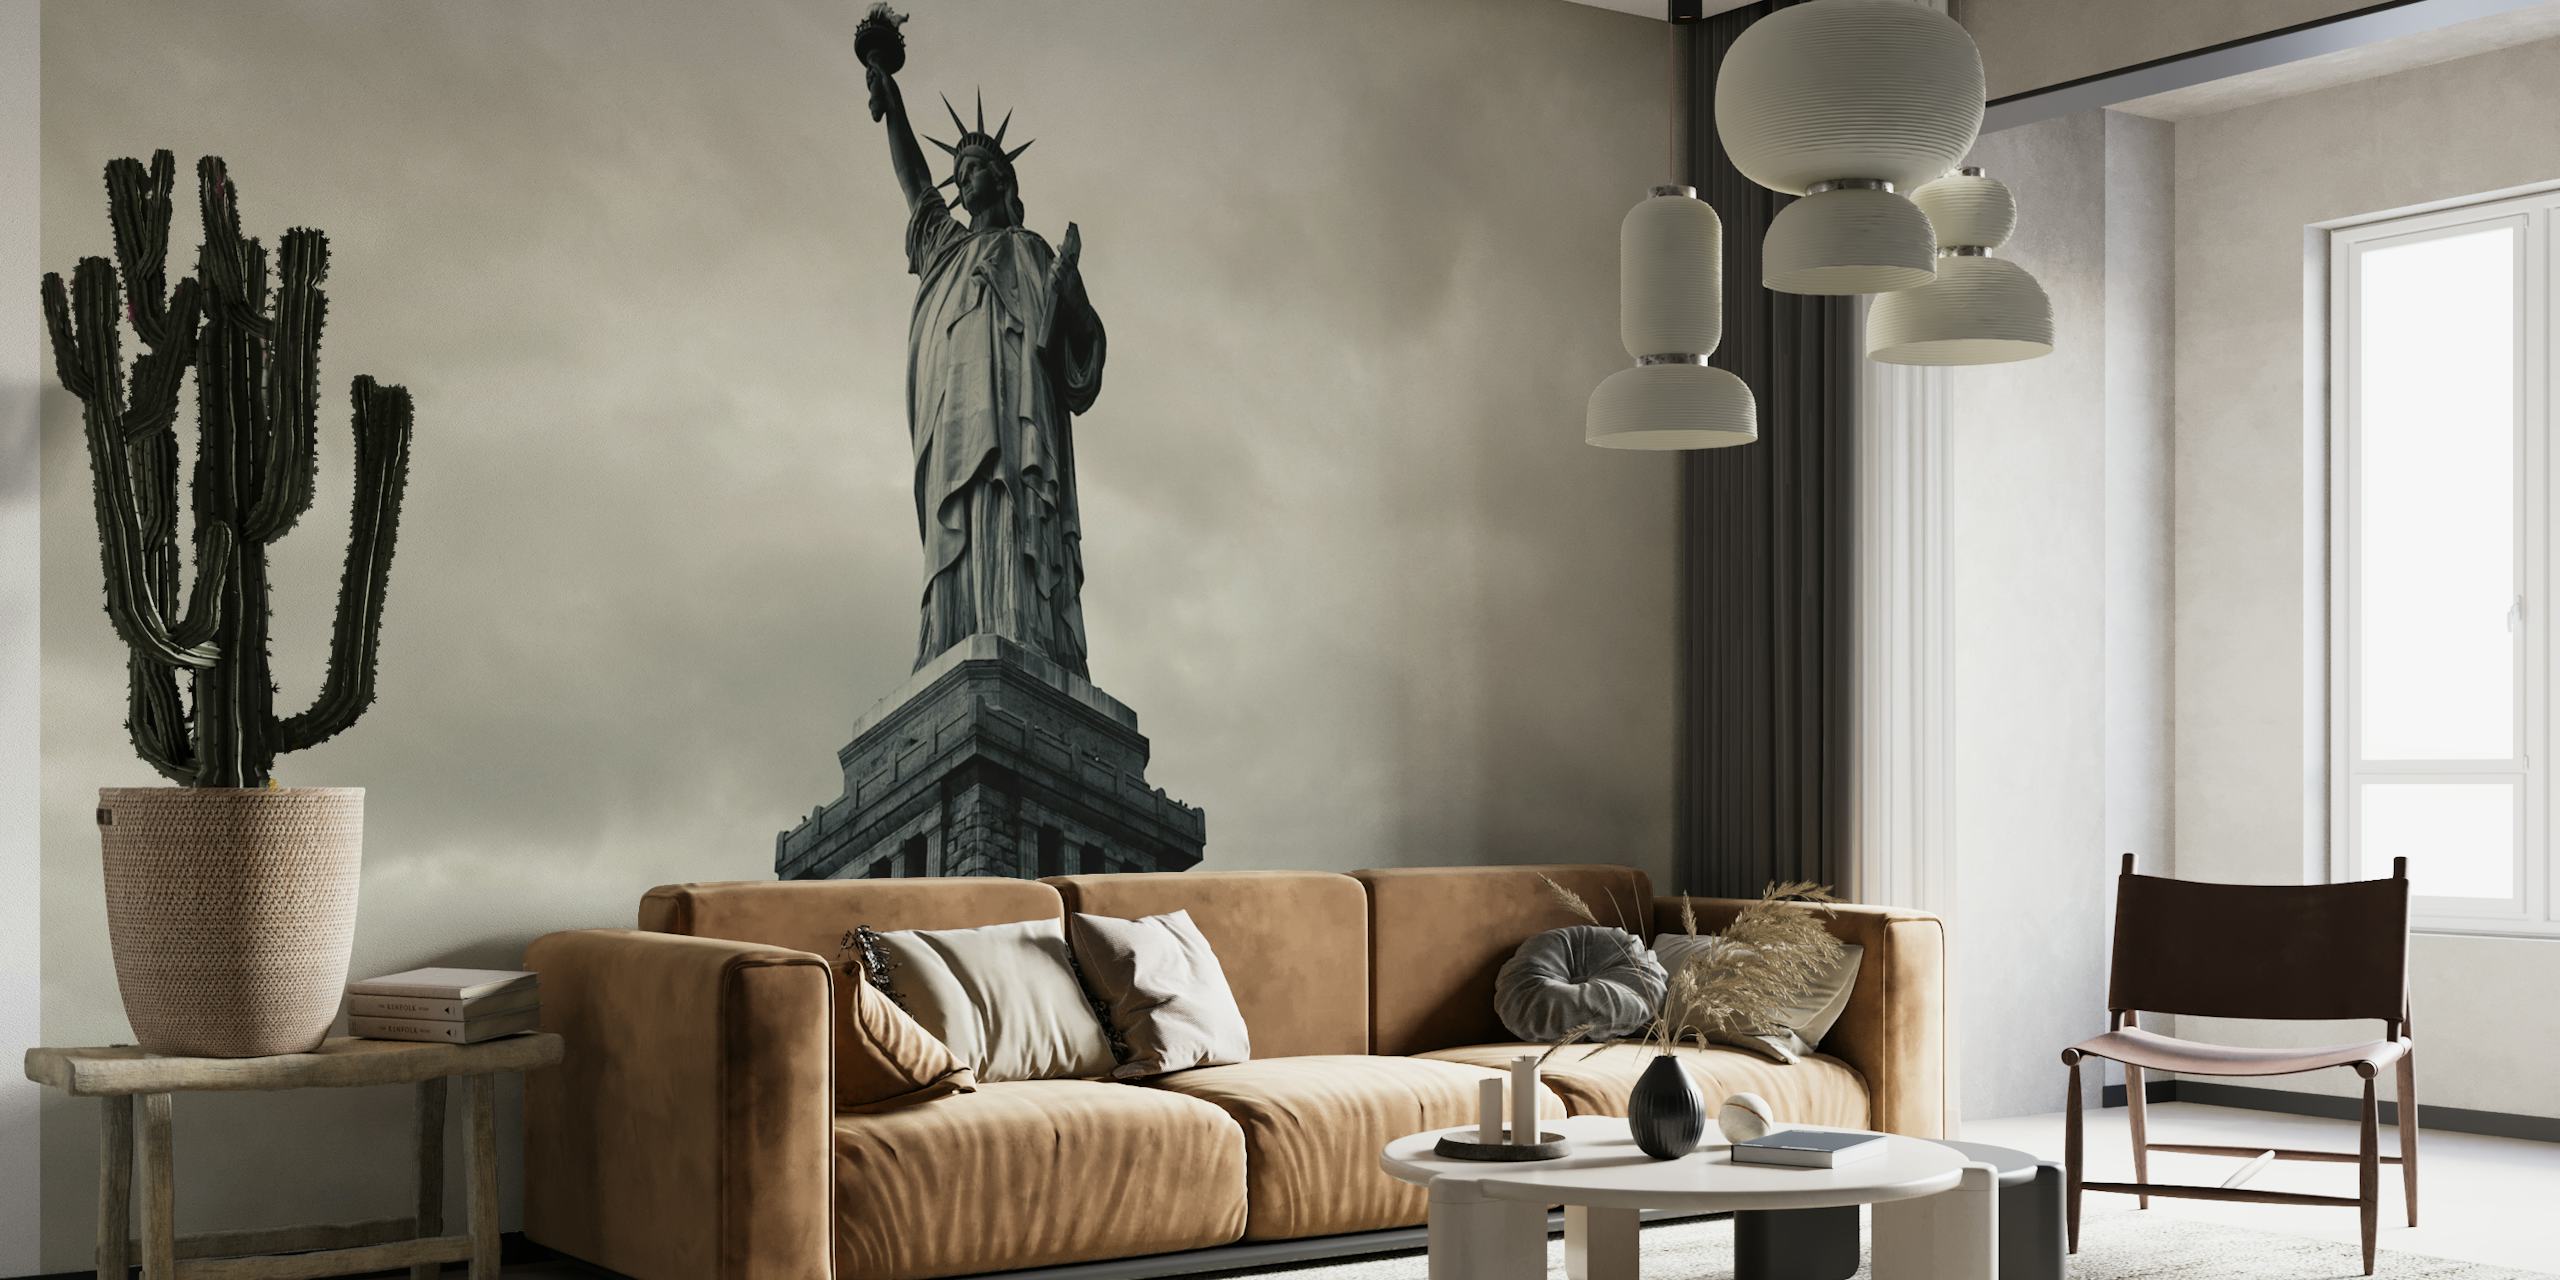 Black and white wall mural of an iconic American statue symbolizing liberty and patriotism